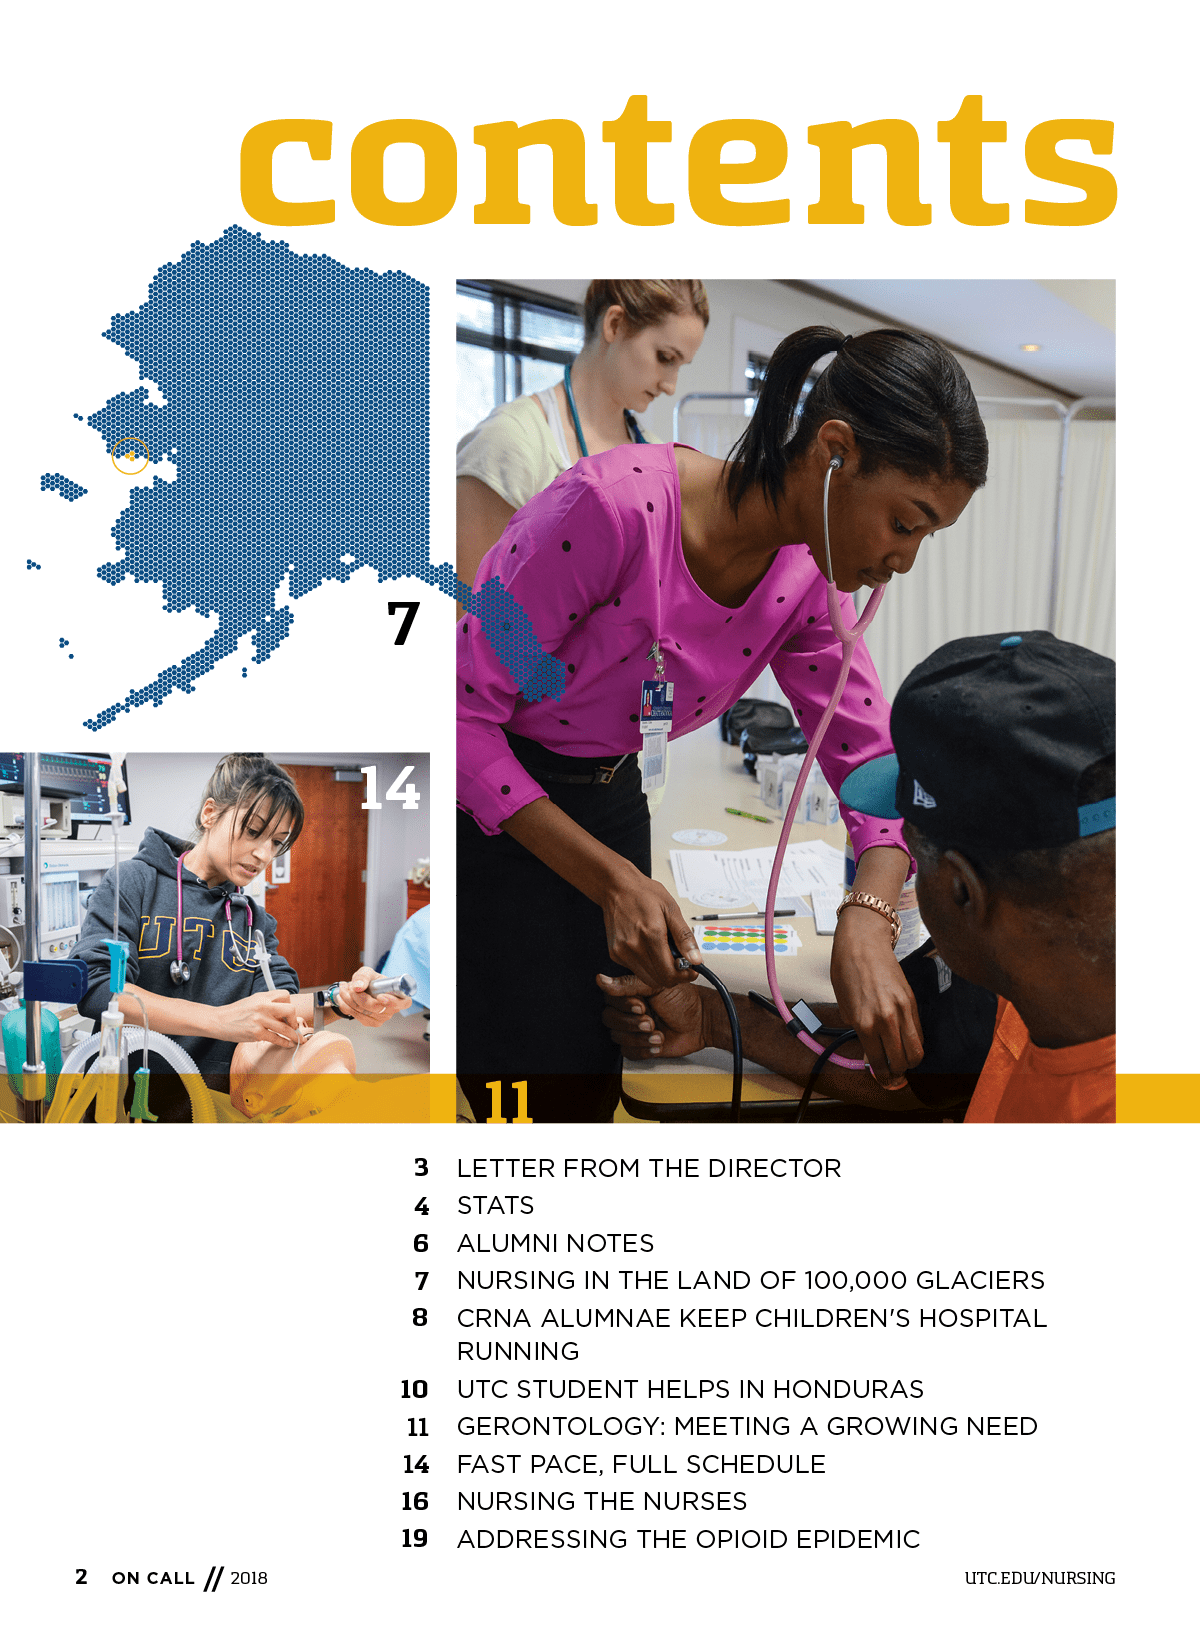 On Call | the magazine of the University of Tennessee at Chattanooga School of Nursing; text equivalent available at utc.edu/nursing/magazine/issues/2018